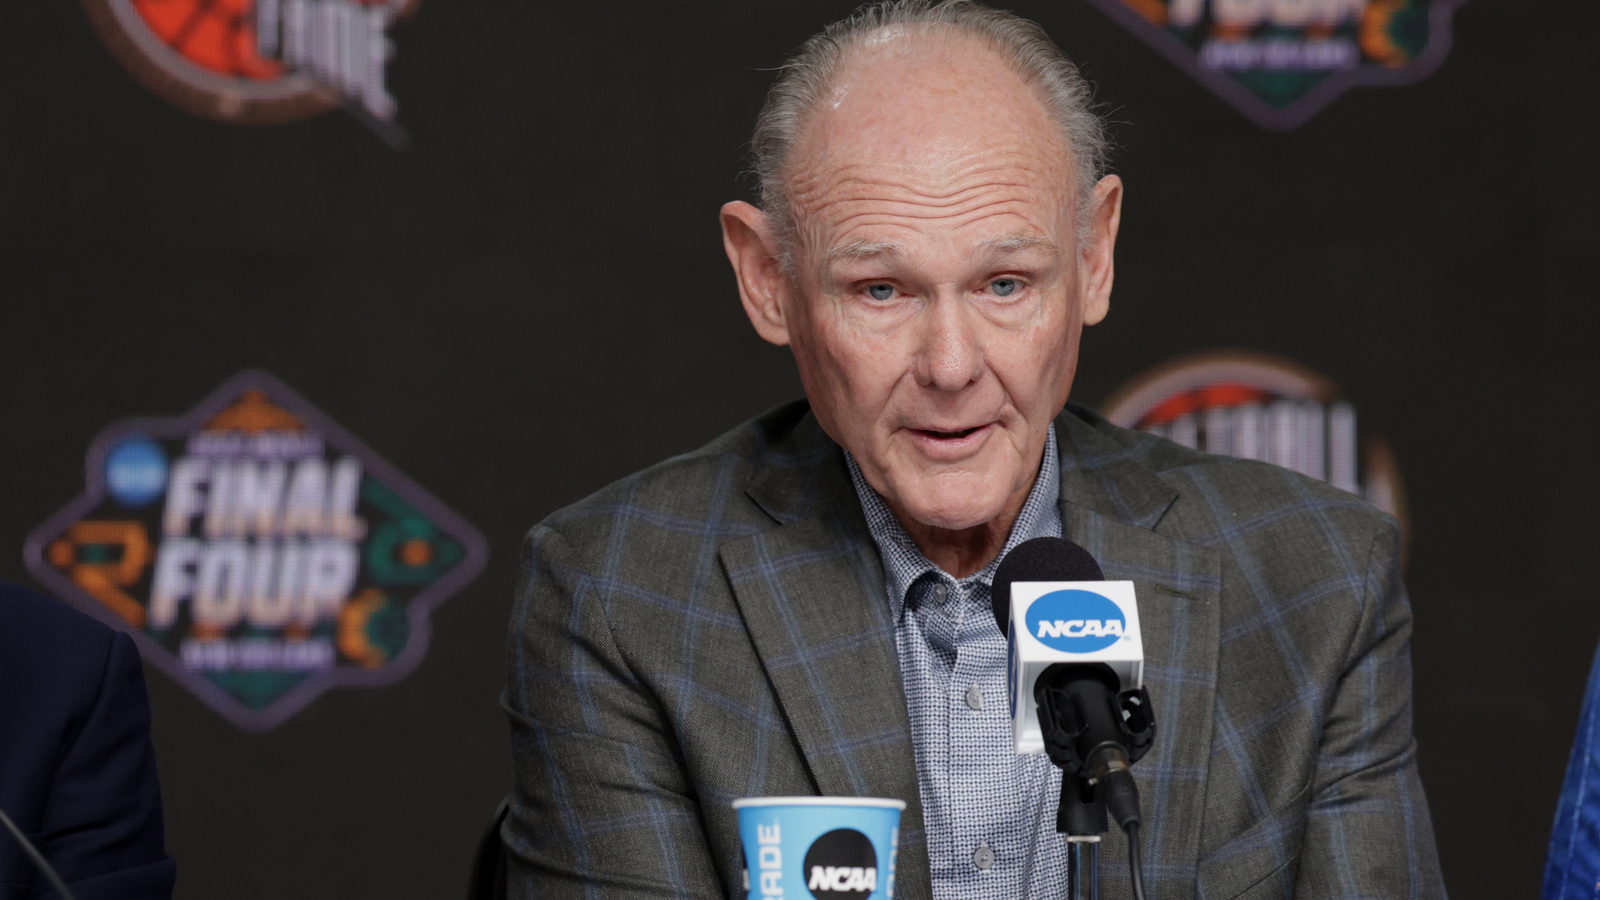 George Karl needs to move on, get over issues with Carmelo Anthony